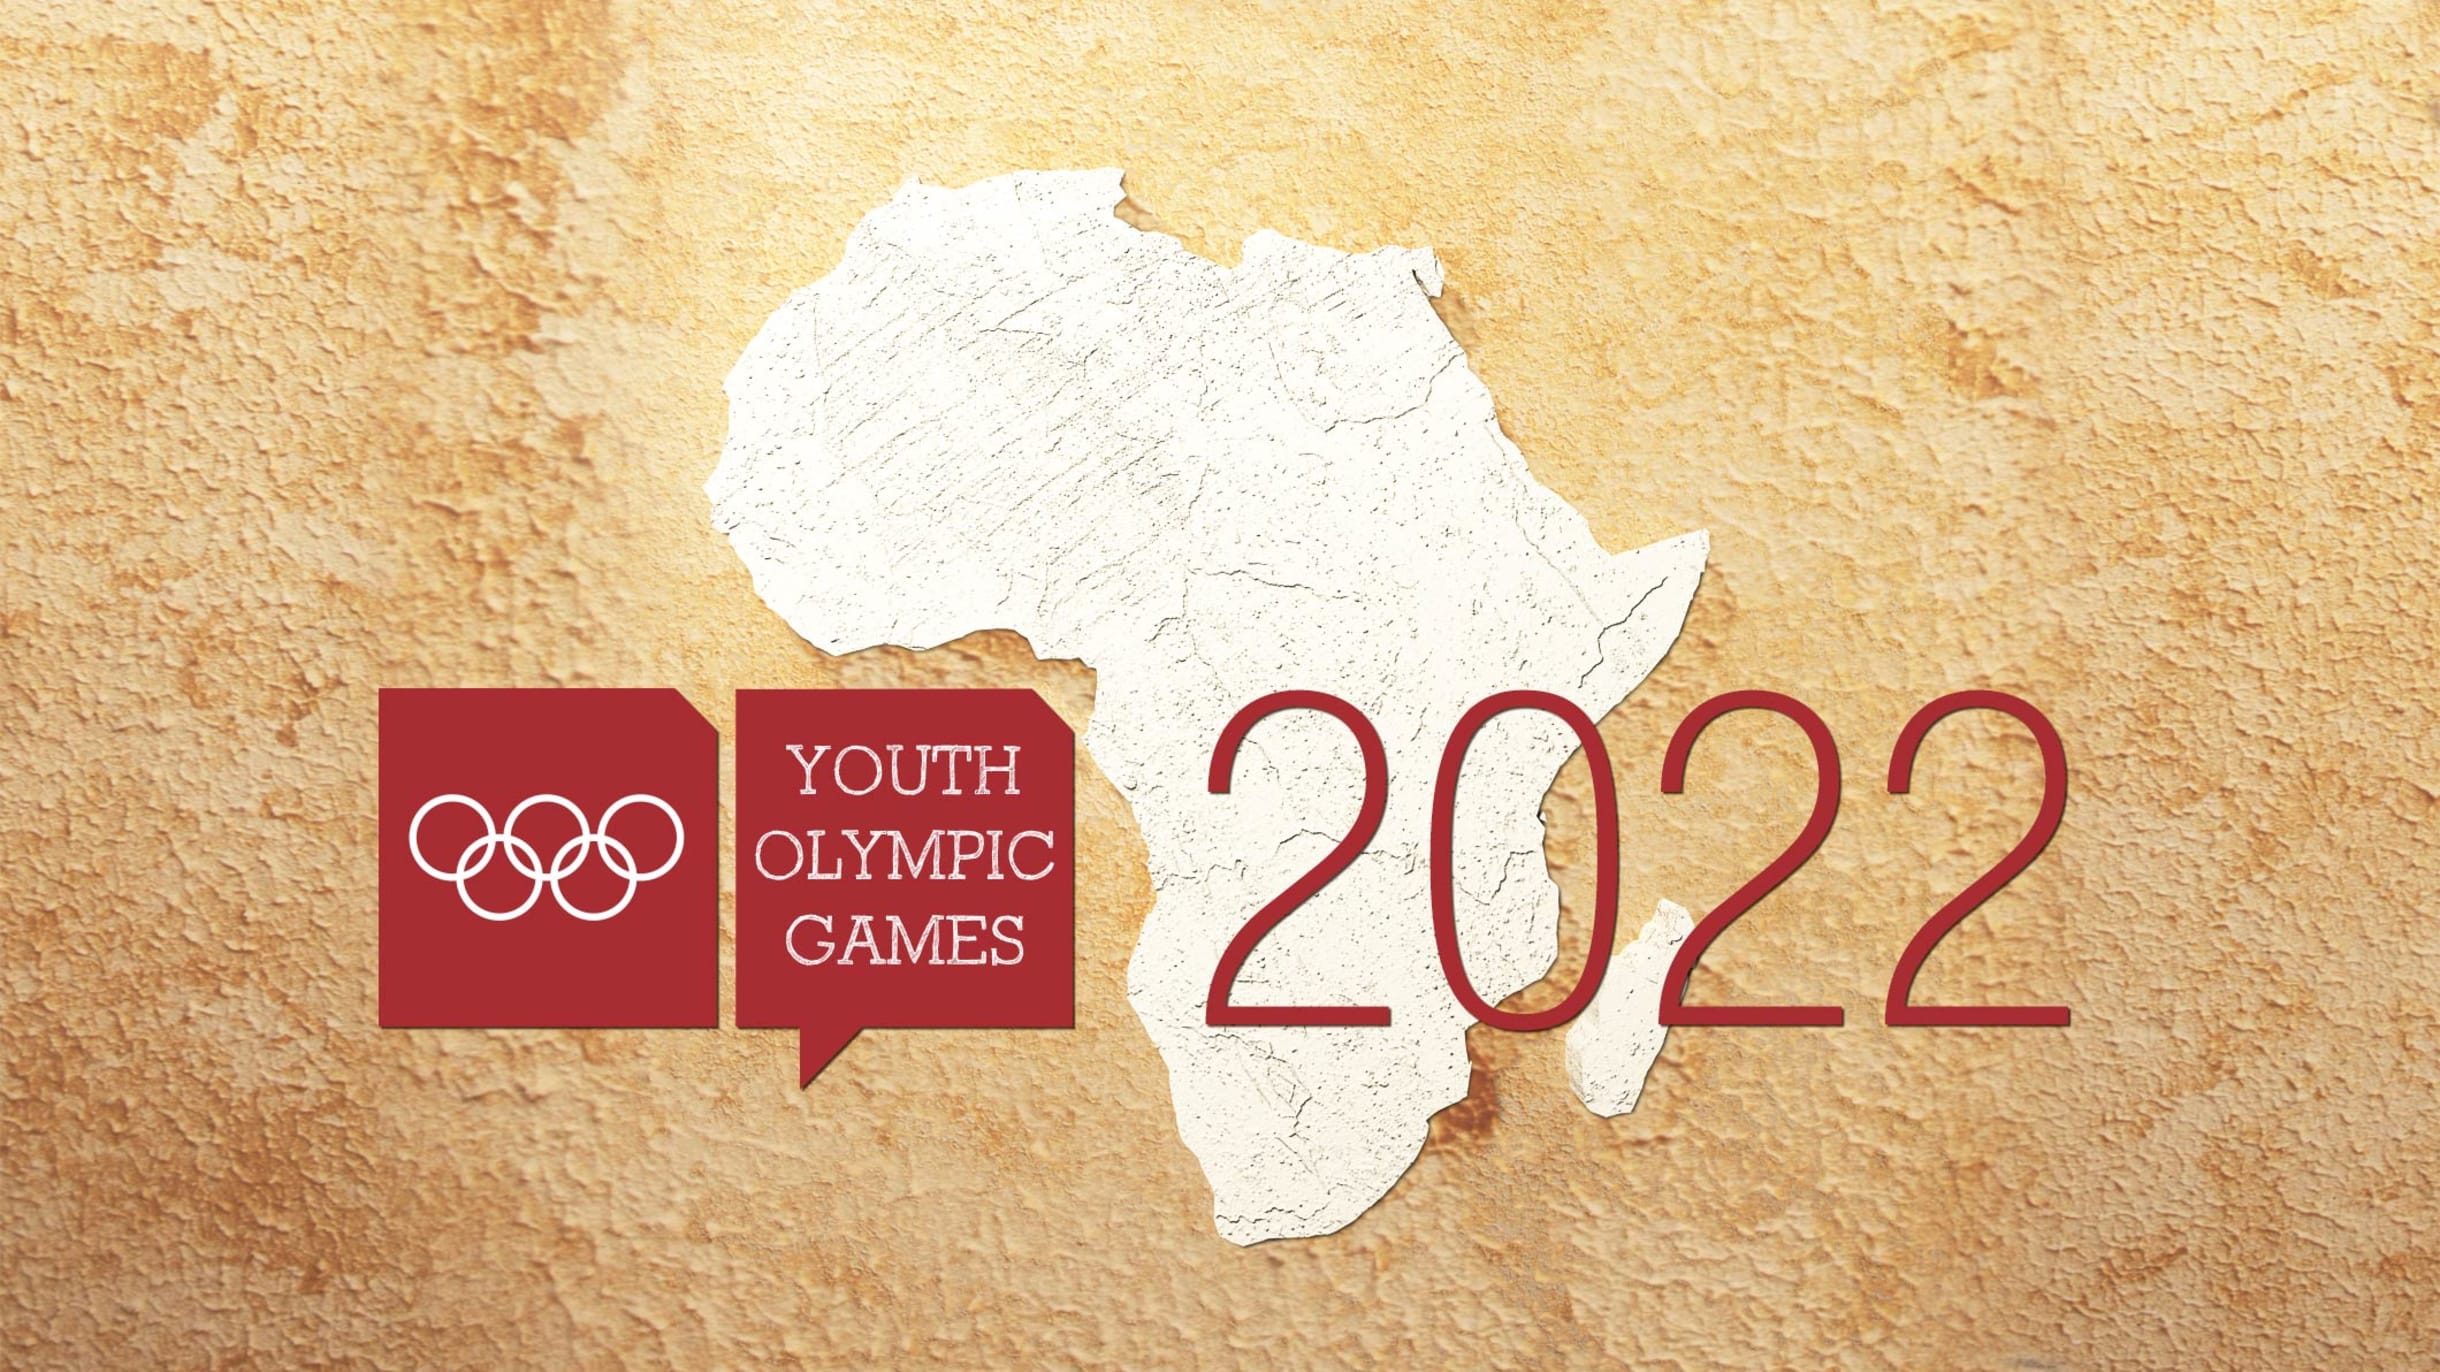 It's time for Africa - see you in Senegal - Olympic News